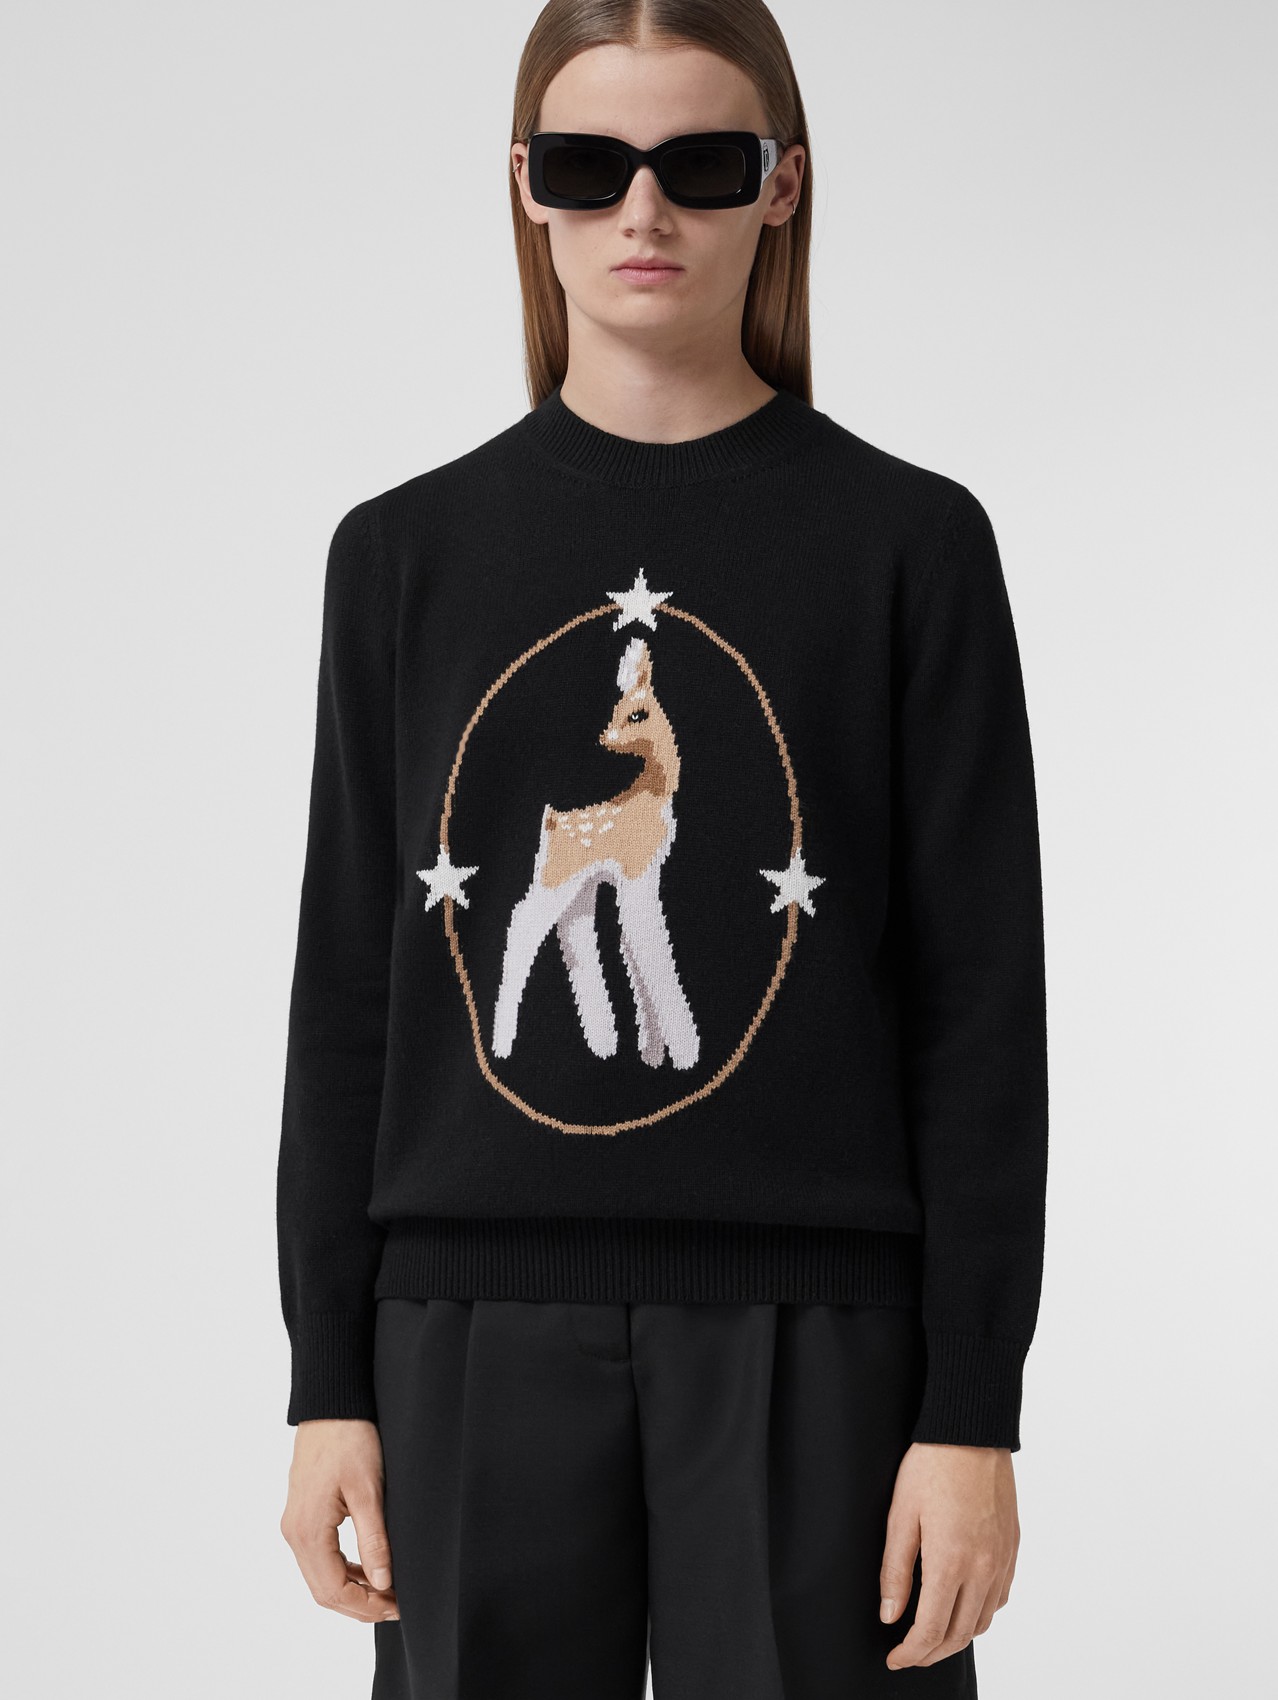 Deer Graphic Intarsia Wool Cashmere Blend Sweater in Black